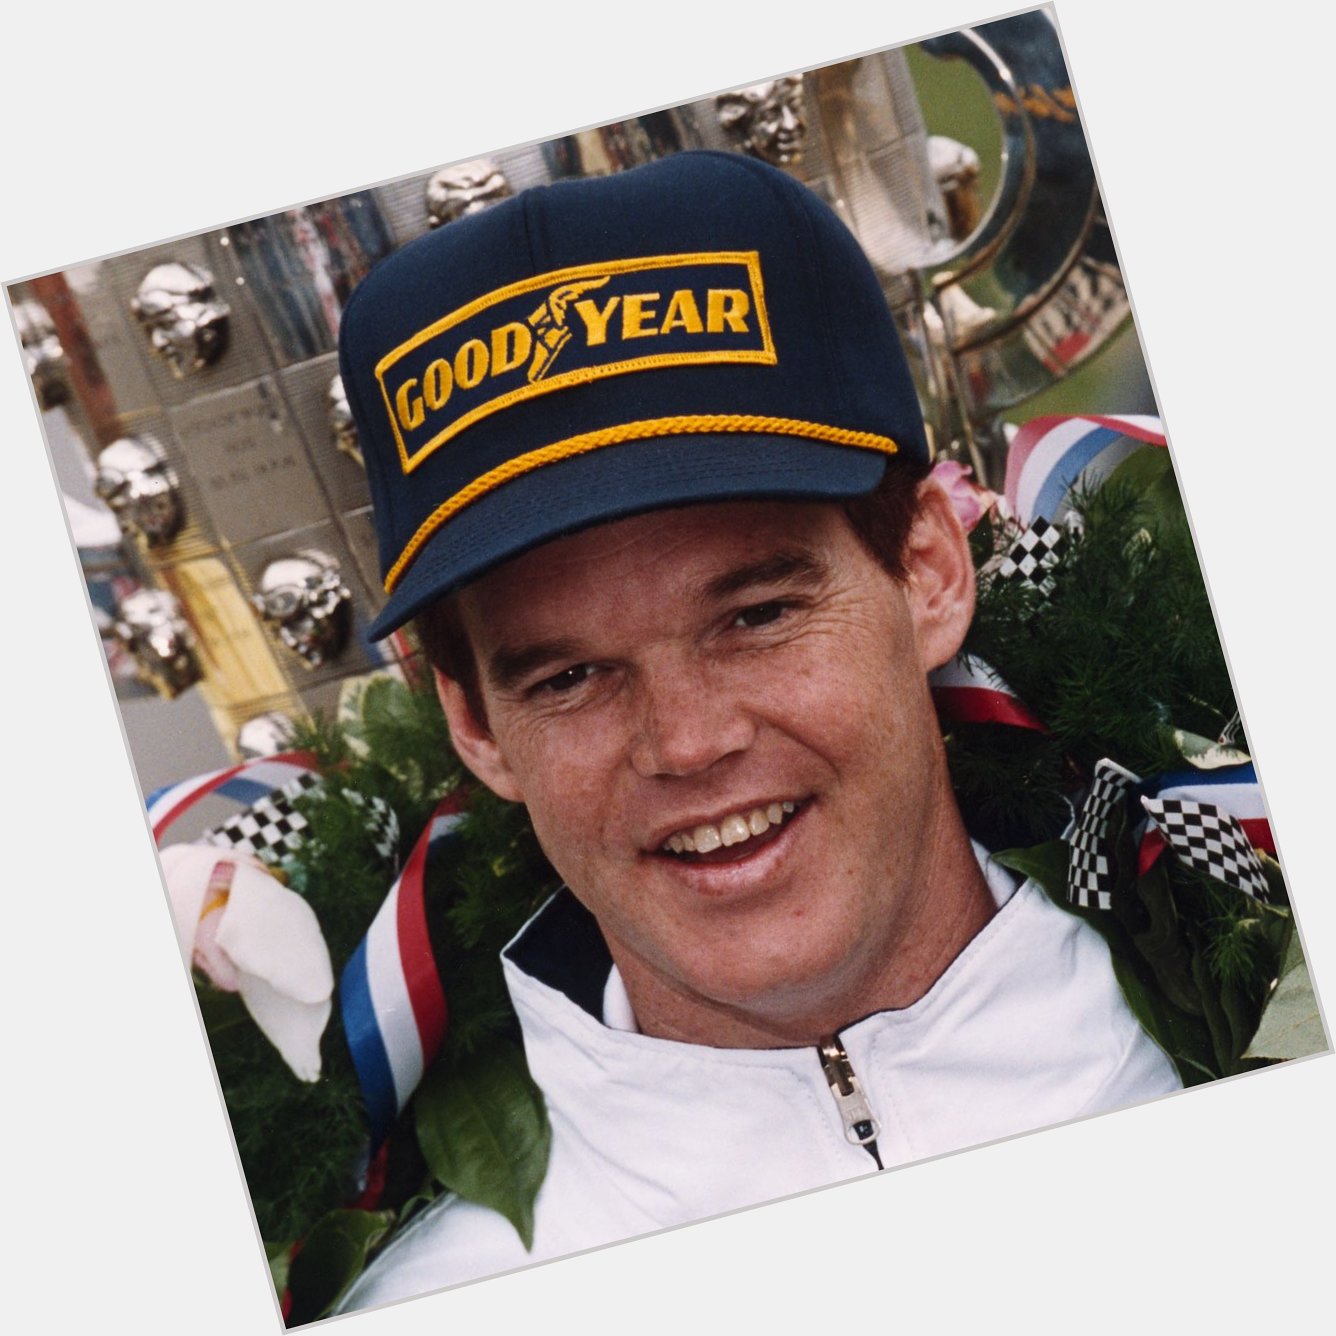 To all you IndyCar fans out there: wish a big happy birthday to Al Unser Jr. and Townsend Bell! 